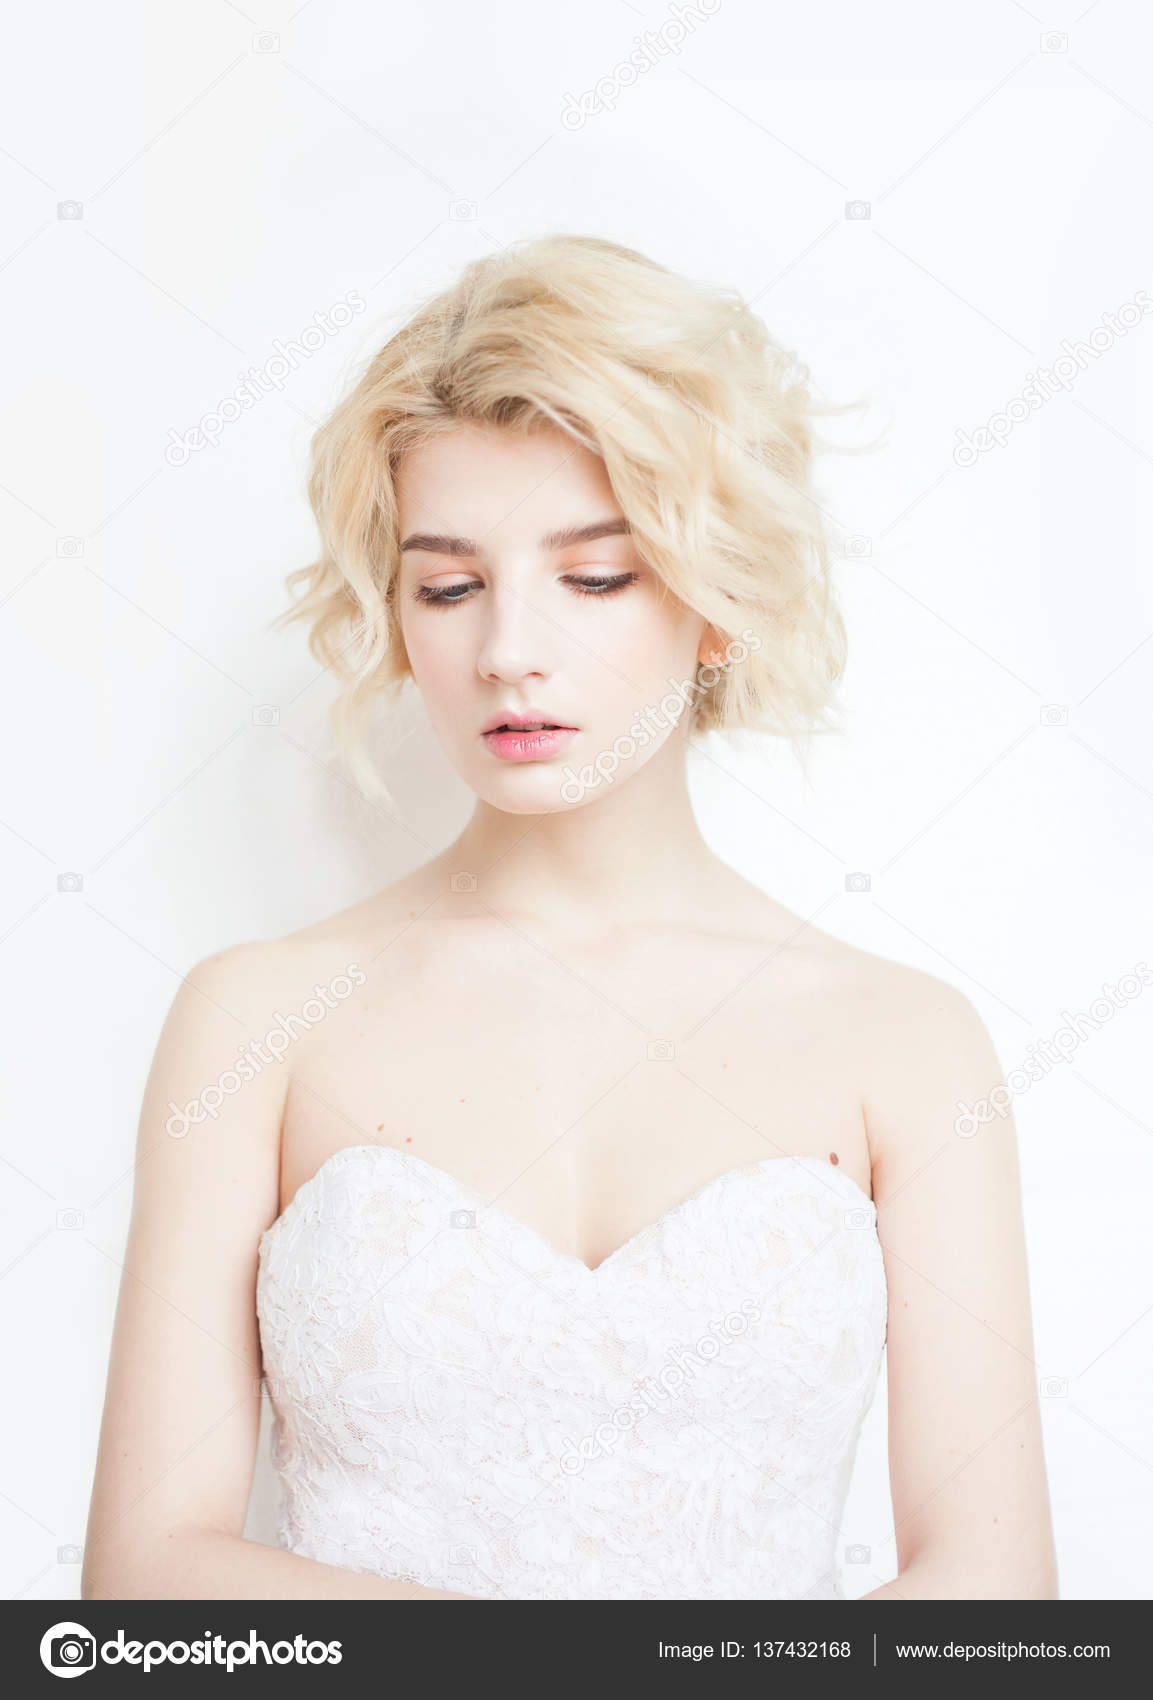 Woman With White Hair In A Wedding Dress Young Blonde Woman With